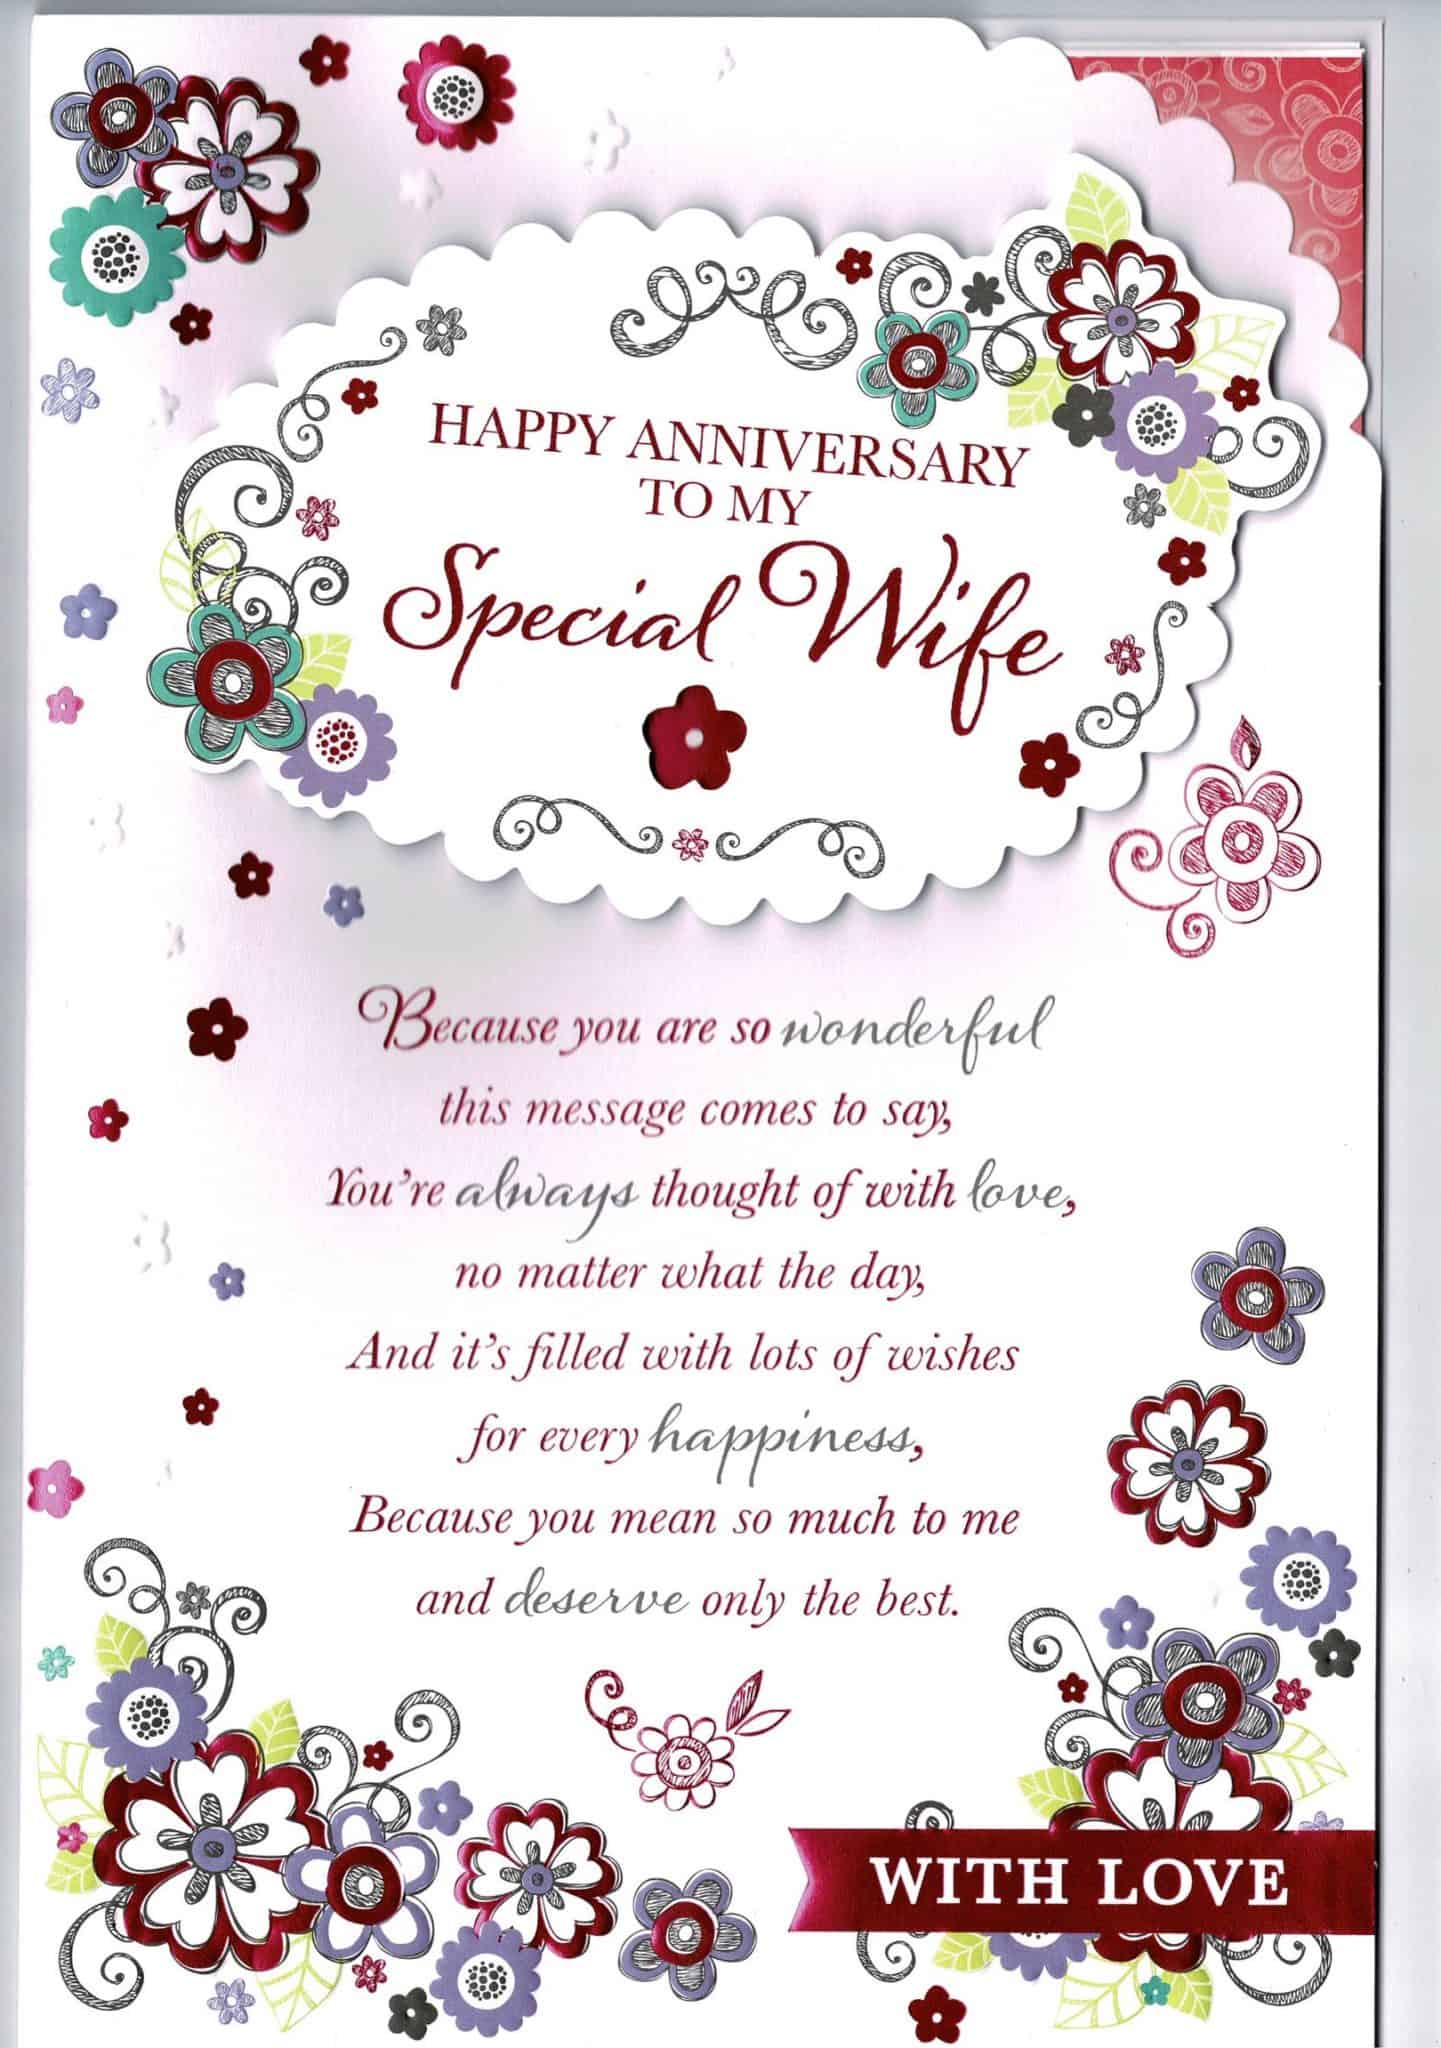 With Love To My Wife On Our Wedding Anniversary Large Card lovely verse